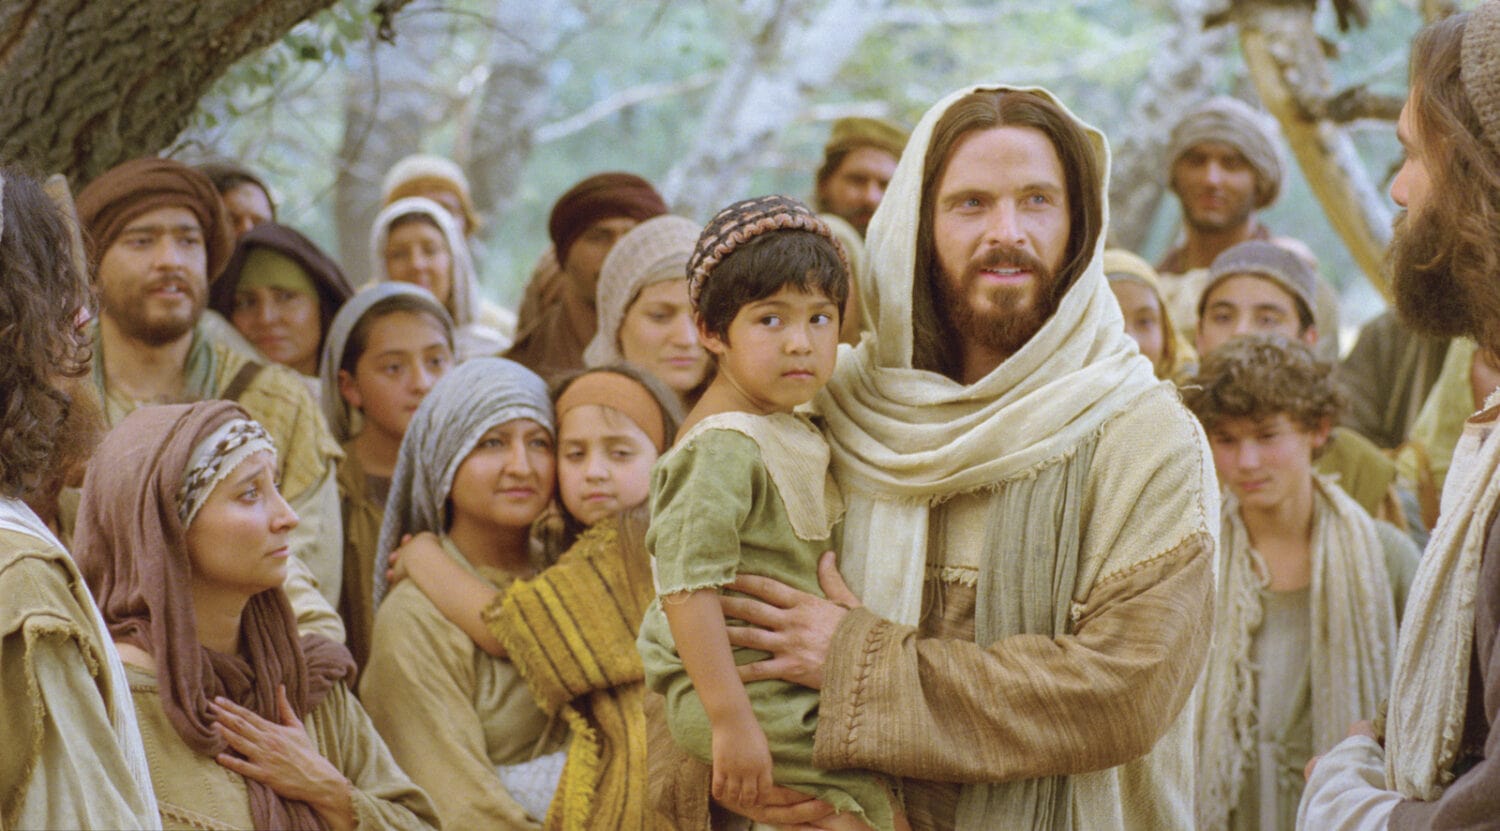 I Will Walk with Jesus Music Videos singing time ideas for LDS Primary music leaders teaching this song.